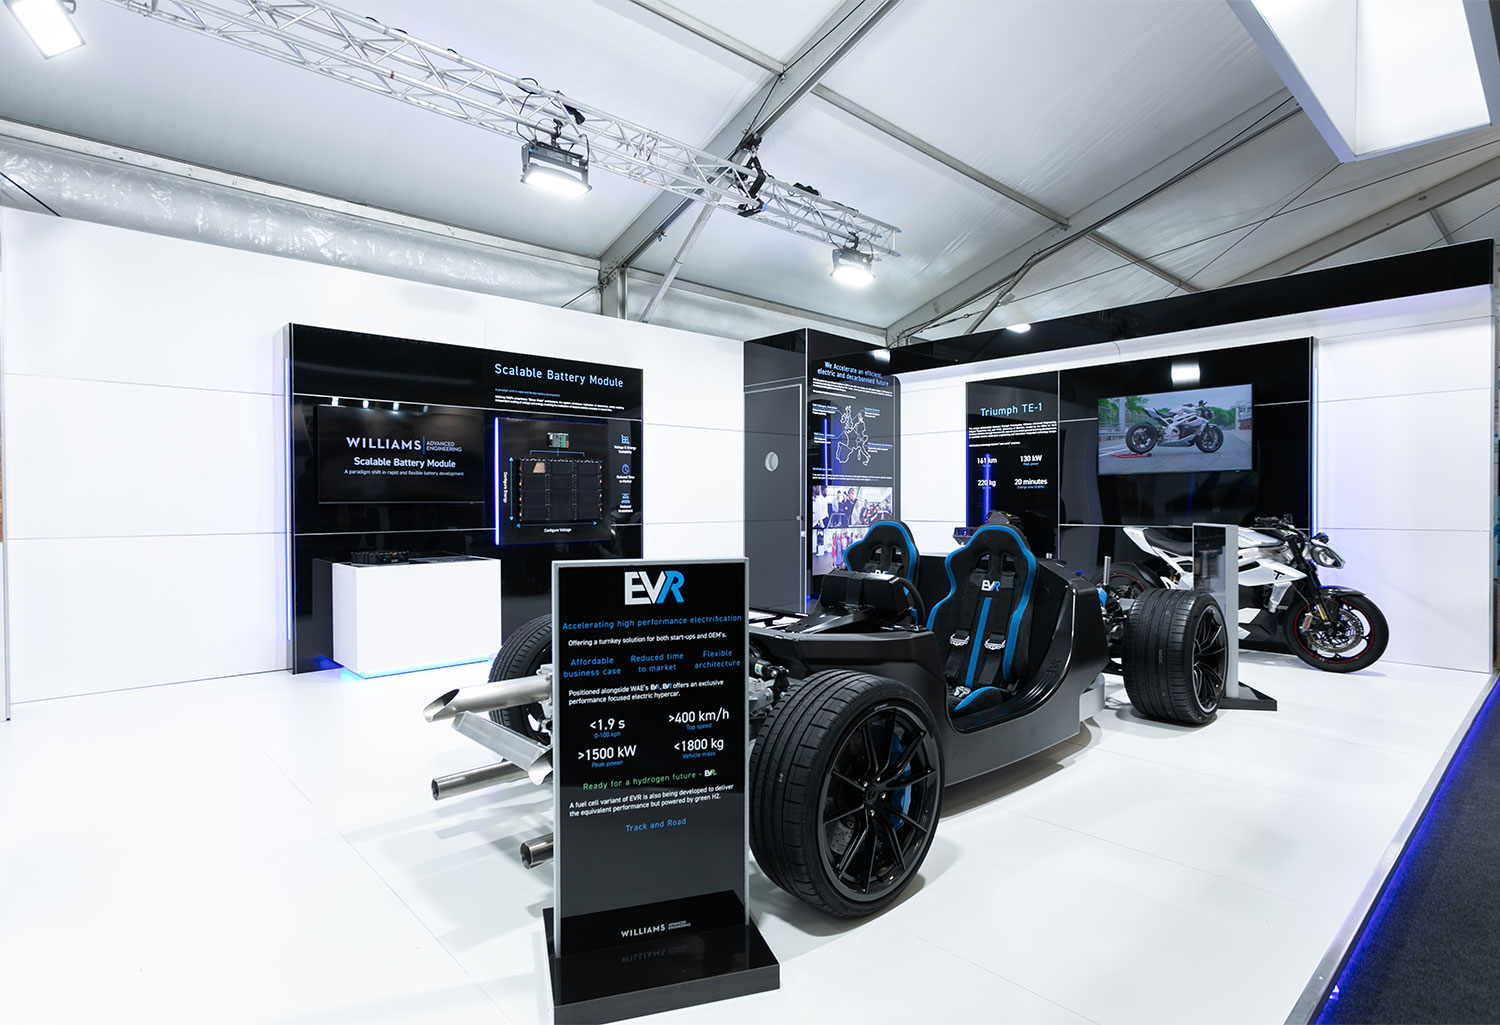 Product view of the EVR Chassis, and product display points in the background